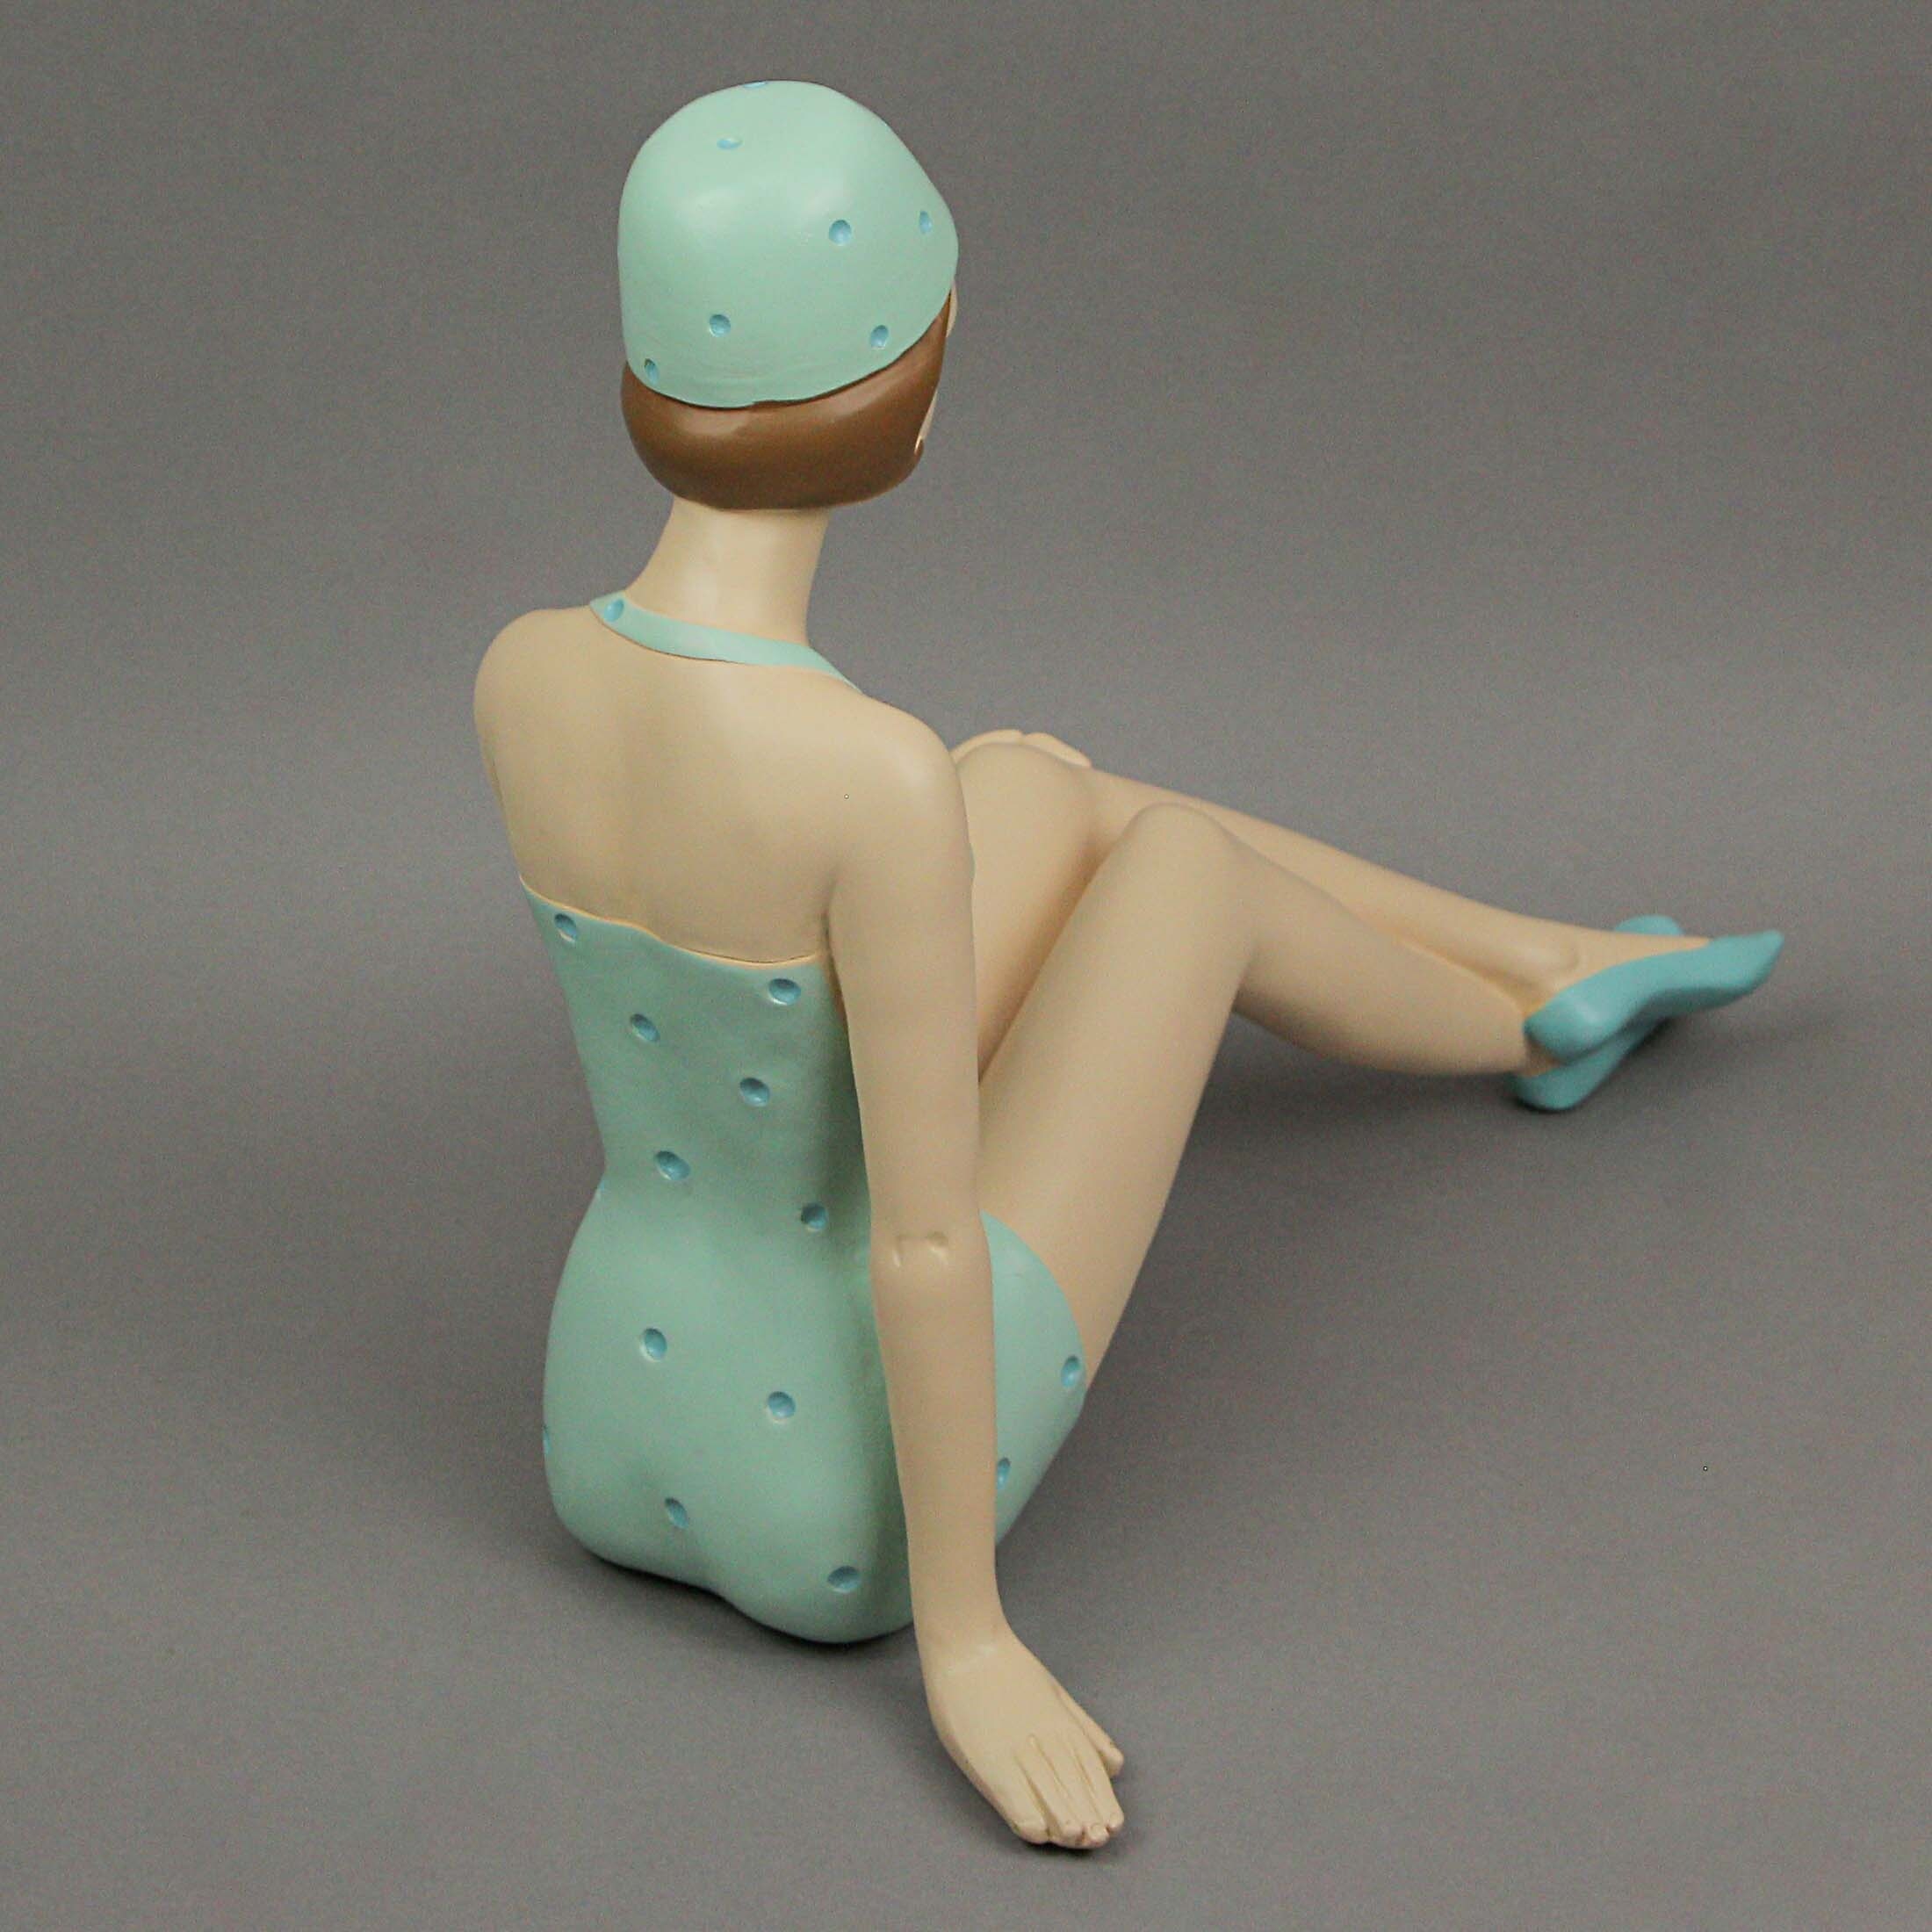 Retro Beach Girl Relaxing In Light Blue Polka Dot Swimsuit Statue - 10.5 X 6.75 X 12.24 inches